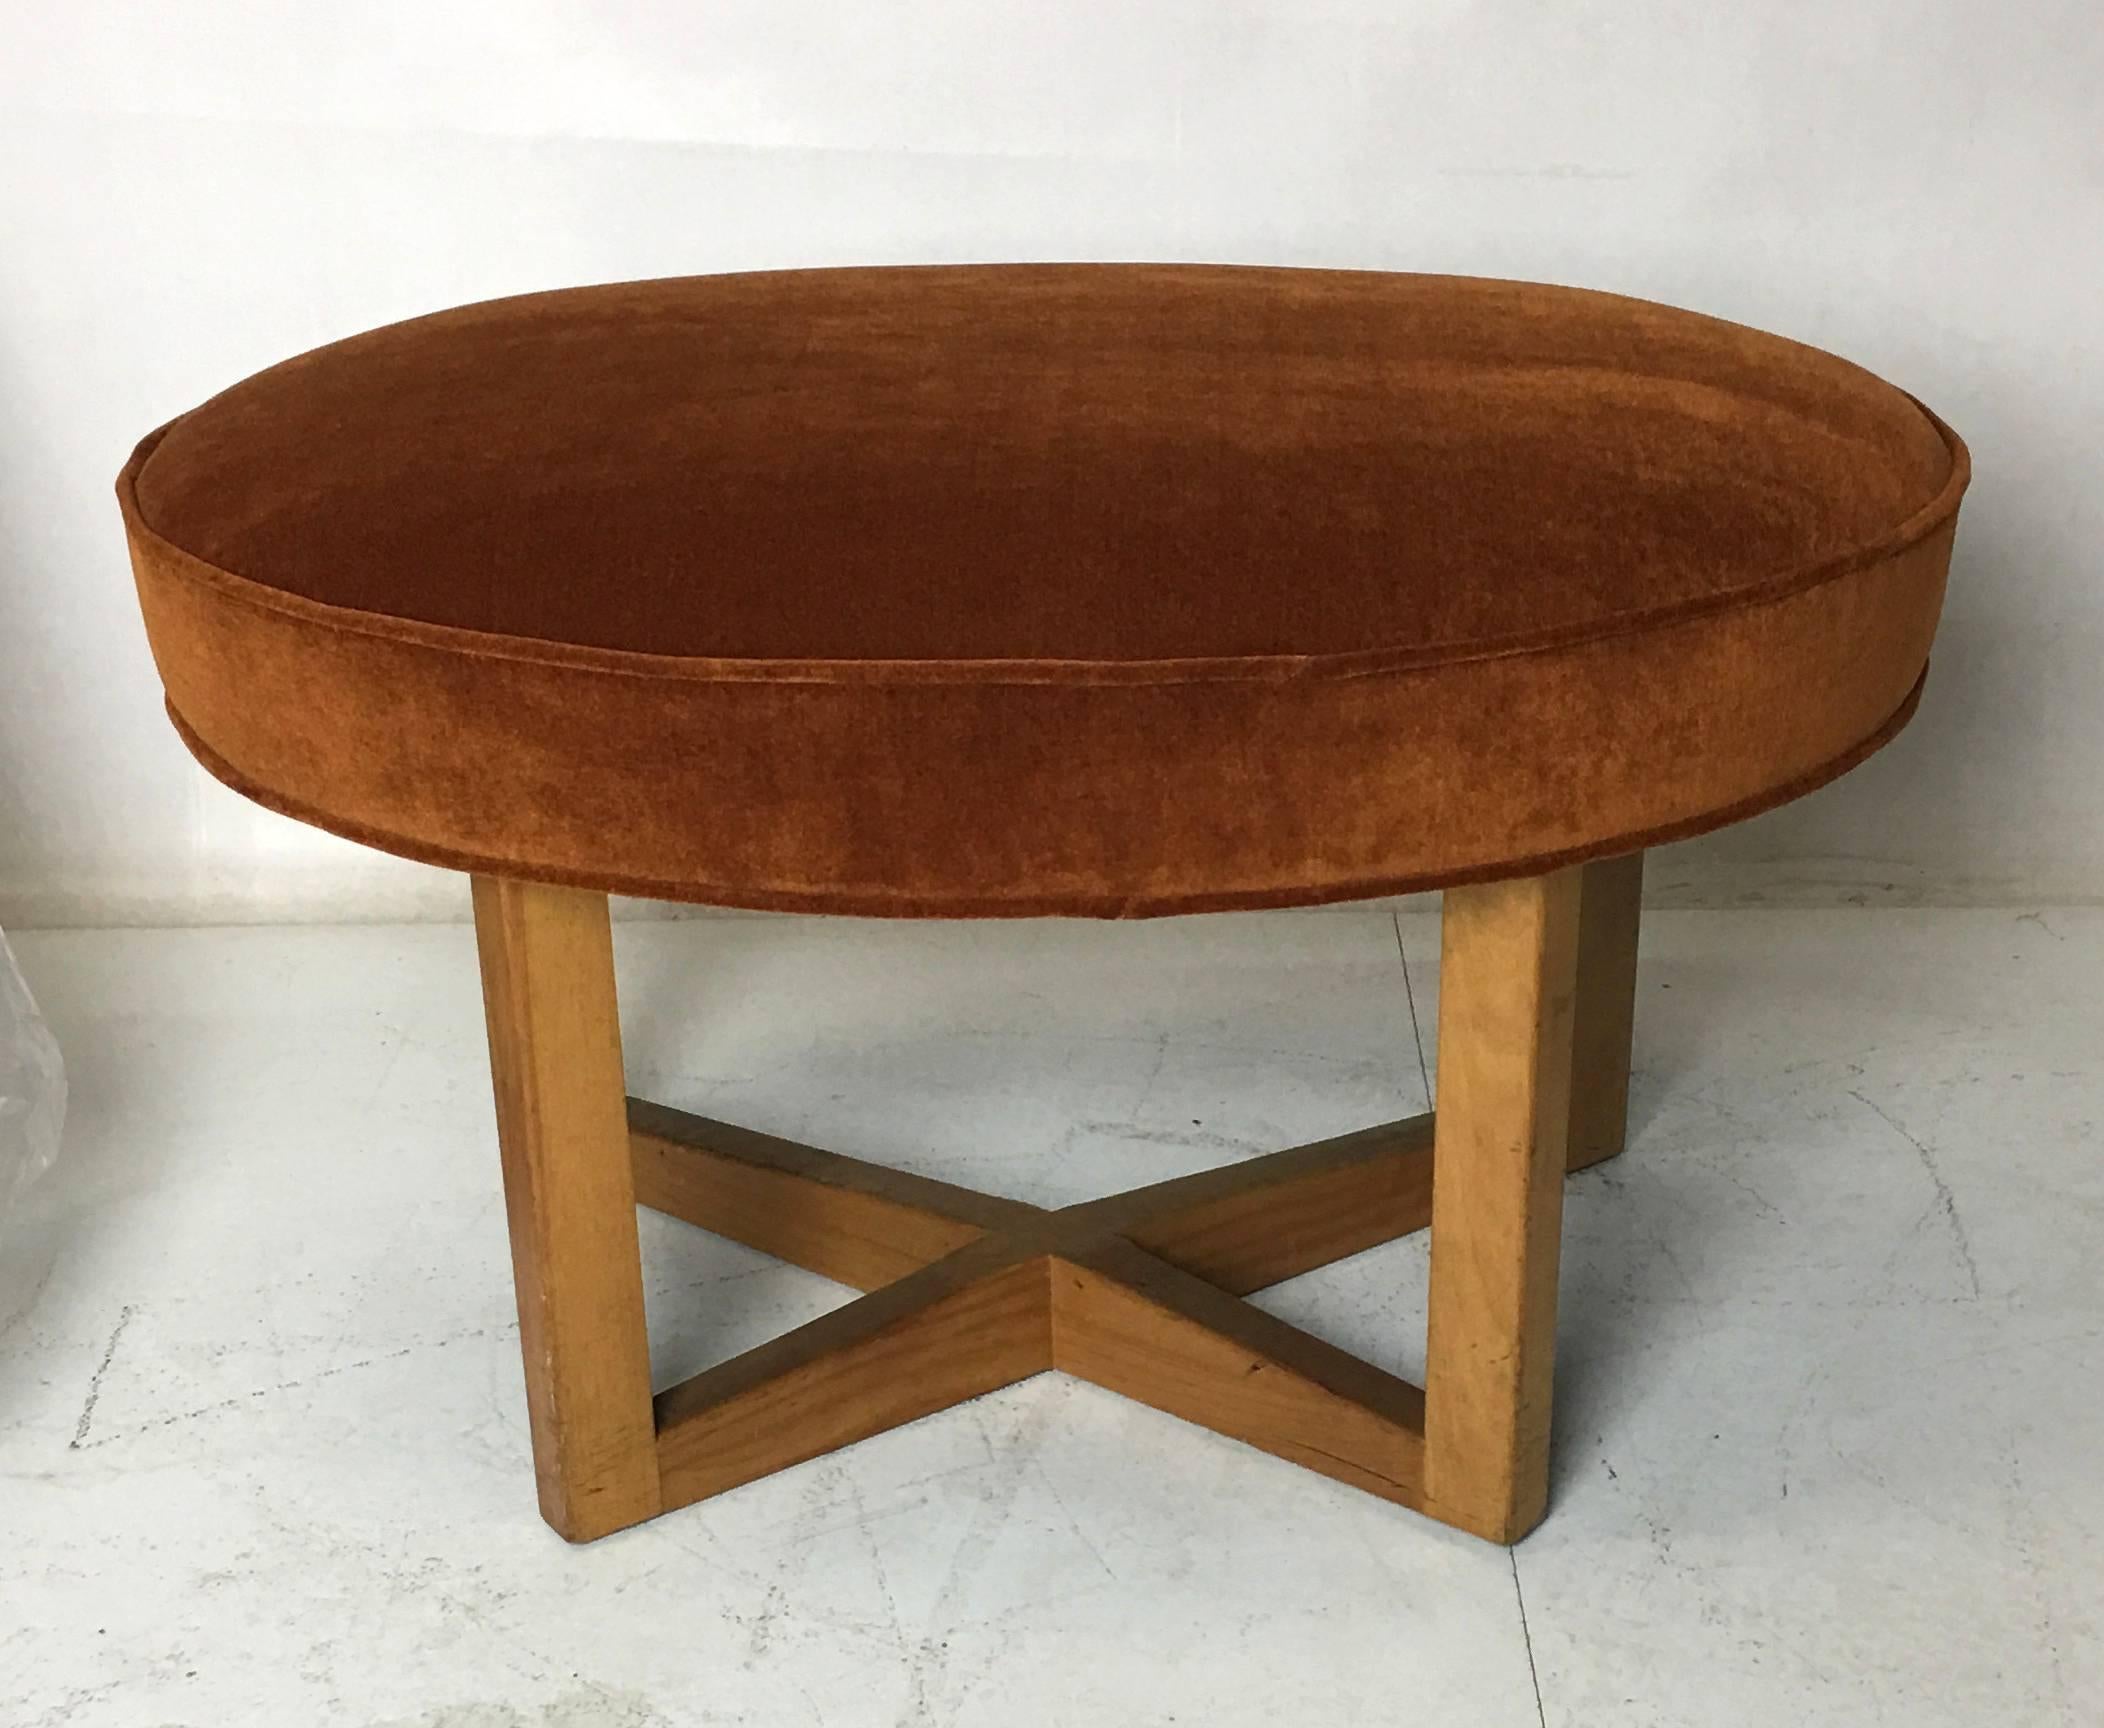 Amply scaled stool or ottoman with a free-form upholstered seat raised on a cruciform base by Paul Laszlo. The seat has been re-upholstered in luxurious heavyweight or backed JB Martin Cotton velvet. This fine piece makes for stylish occasional